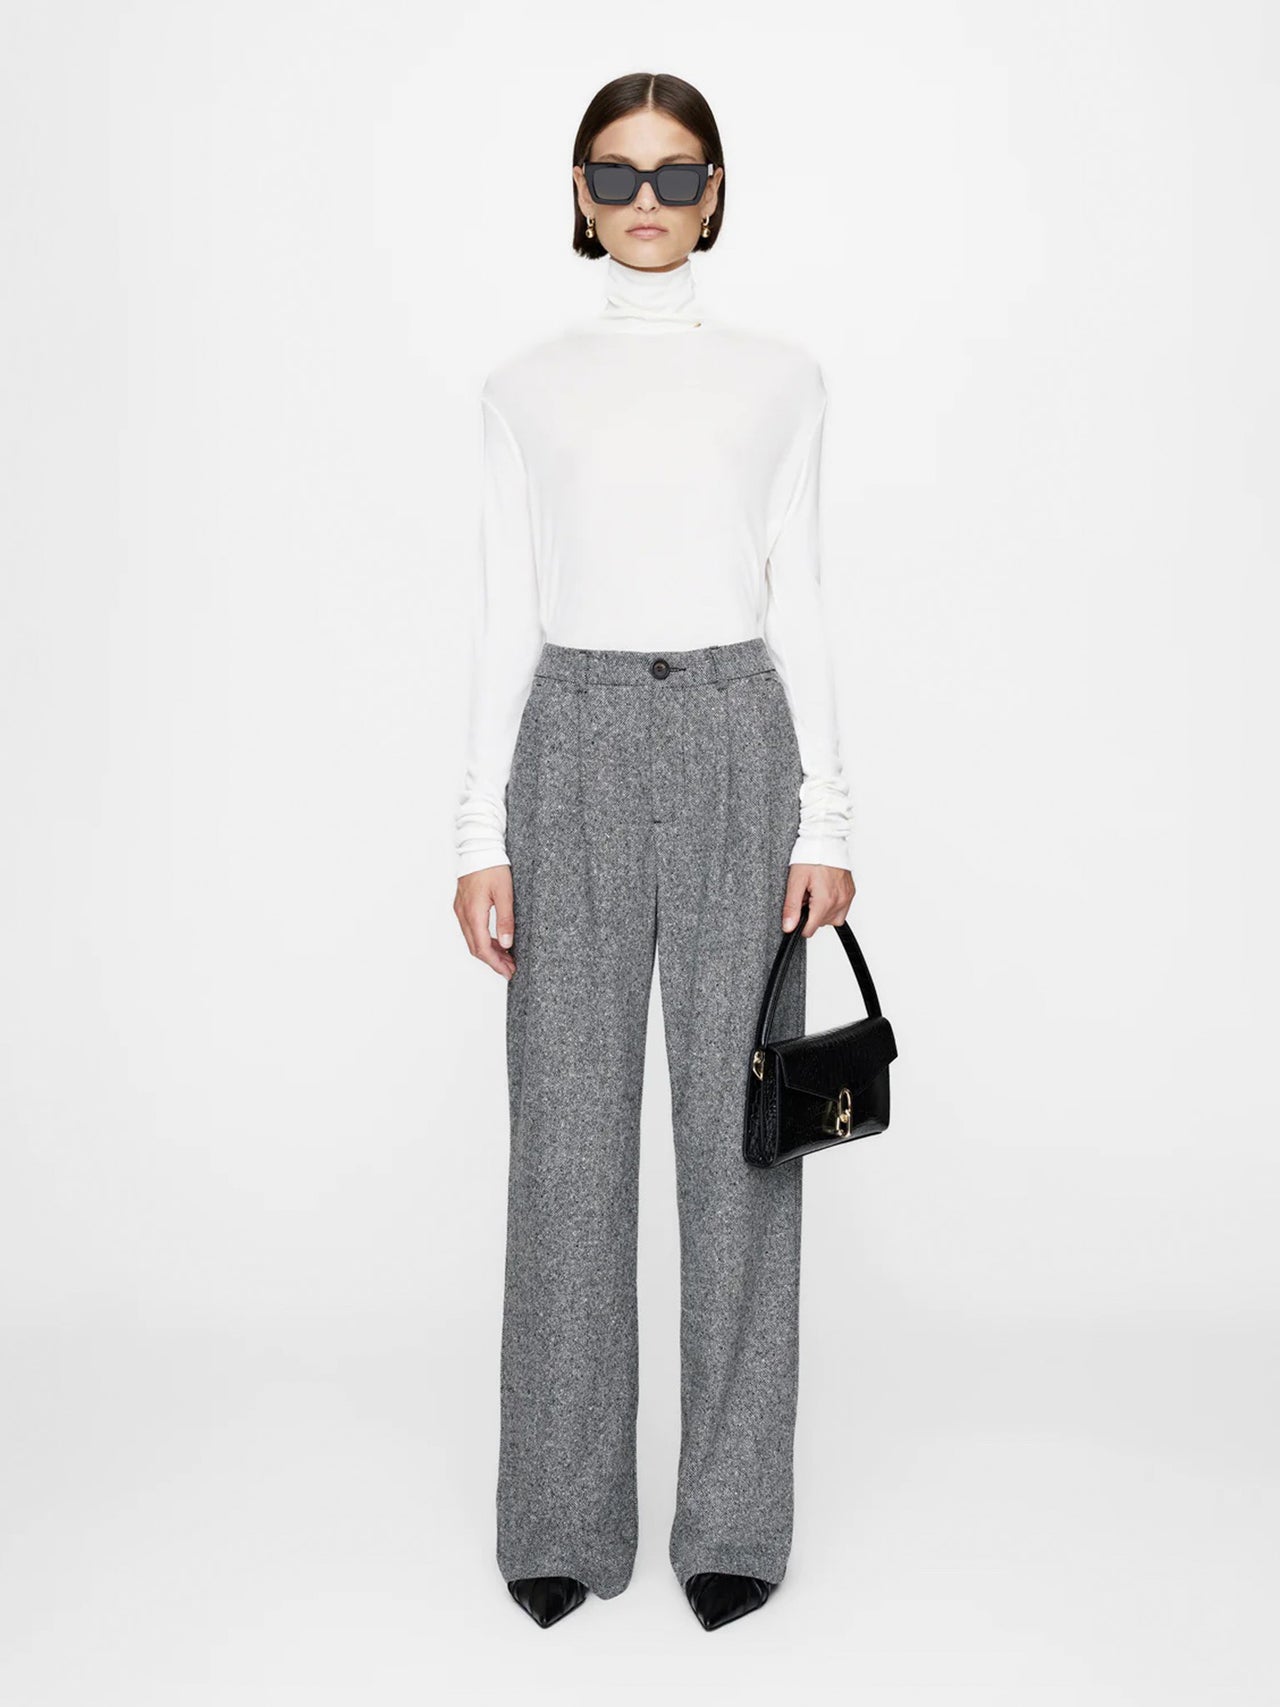 Anine Bing Carrie Pant Black and White